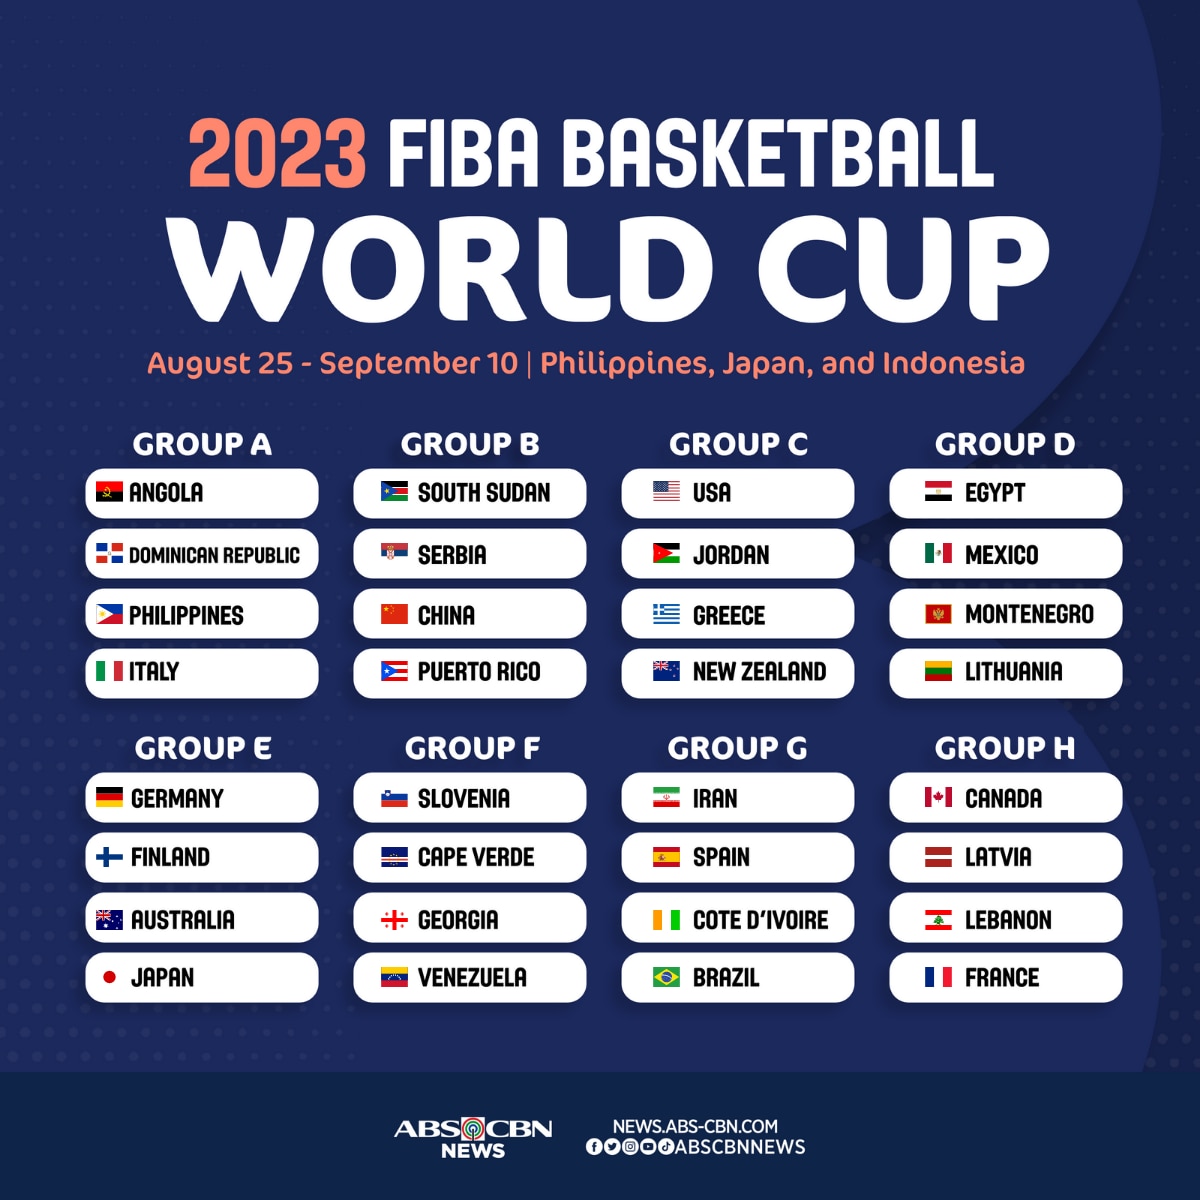 Gilas to go up vs Italy, Dominican Republic in FIBA World Cup ABSCBN